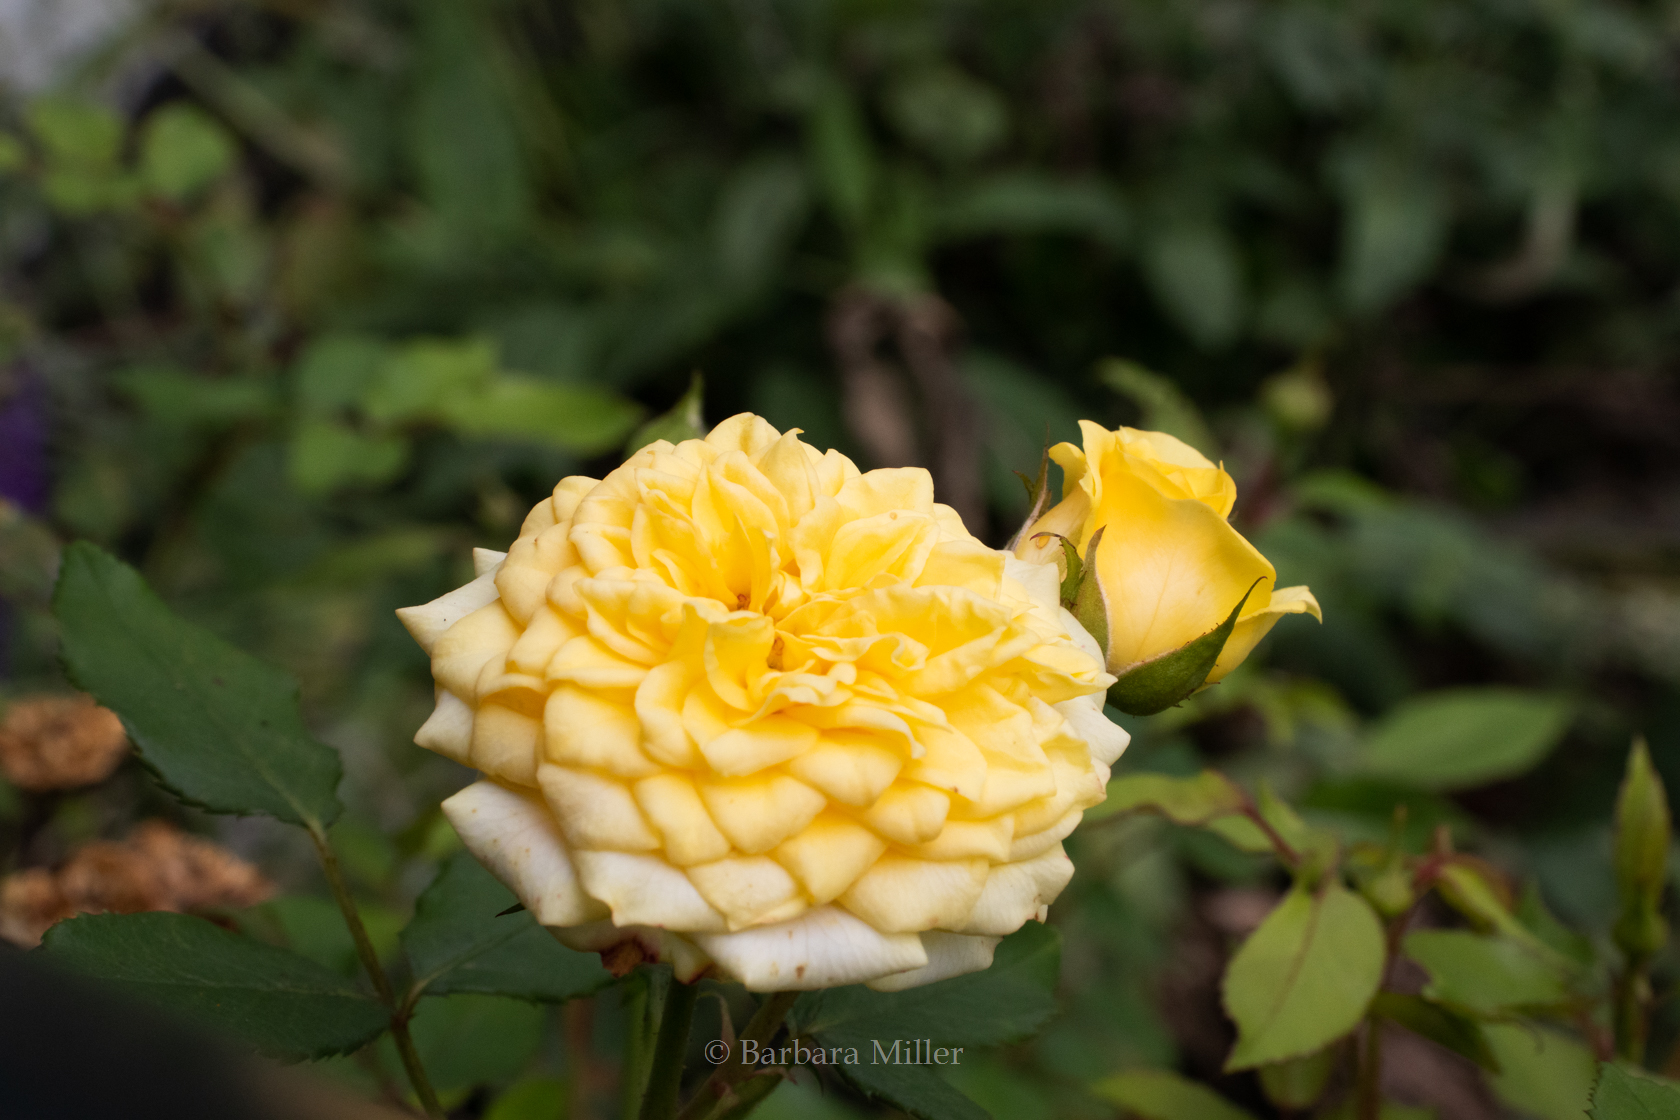 Close up of a miniature yellow rose with a green background.